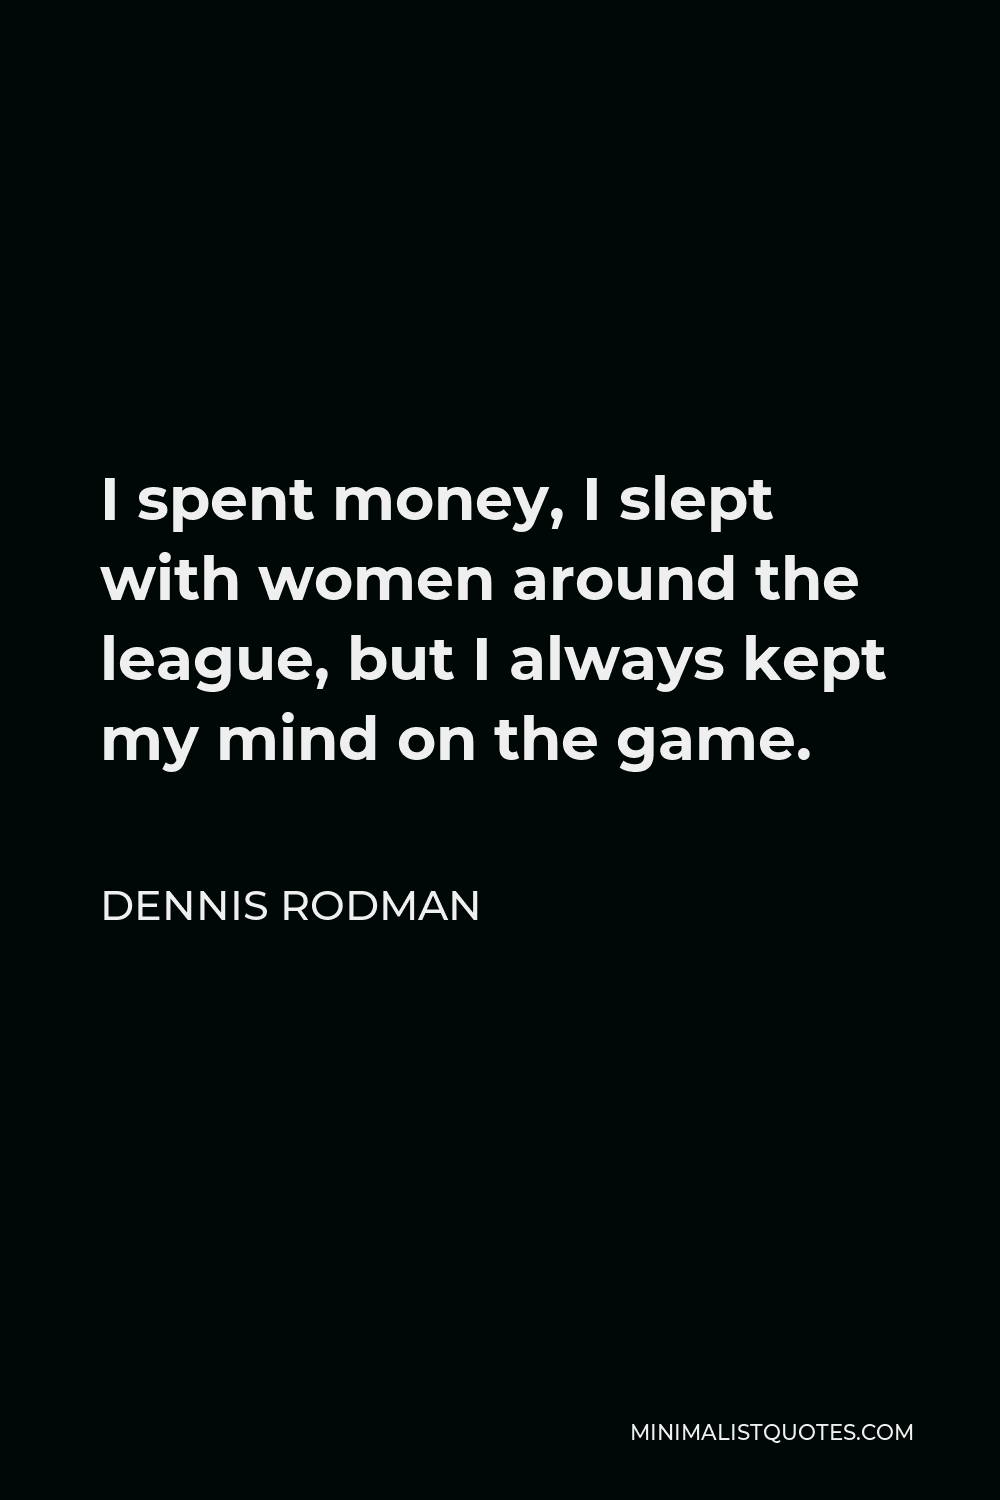 Dennis Rodman Quote - I spent money, I slept with women around the league, but I always kept my mind on the game.